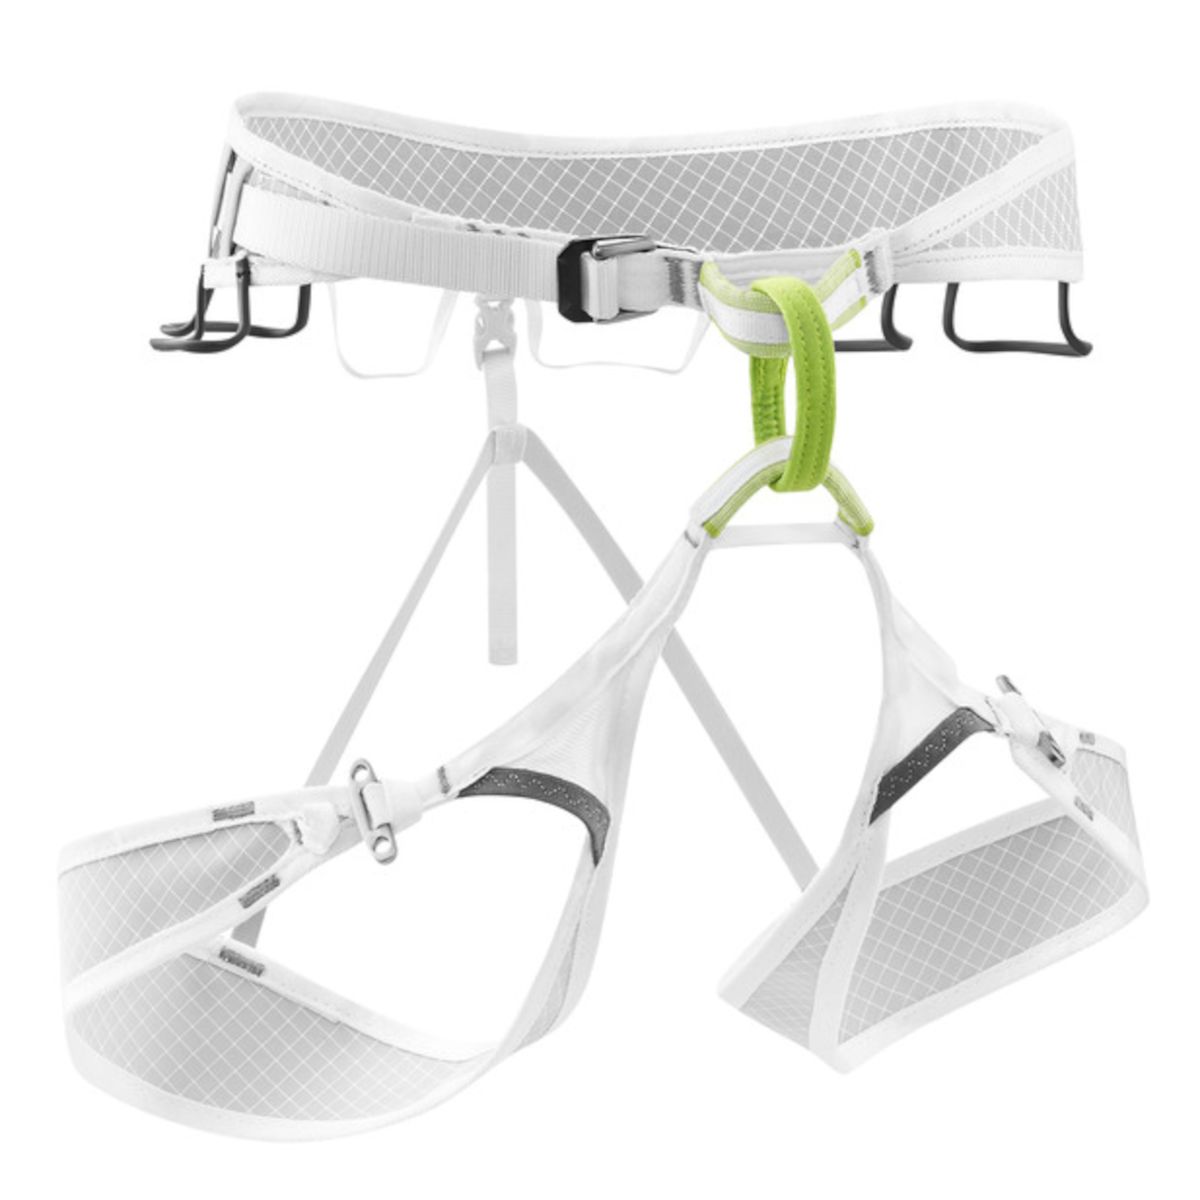 Edelrid Prisma Guide Harness - Front View